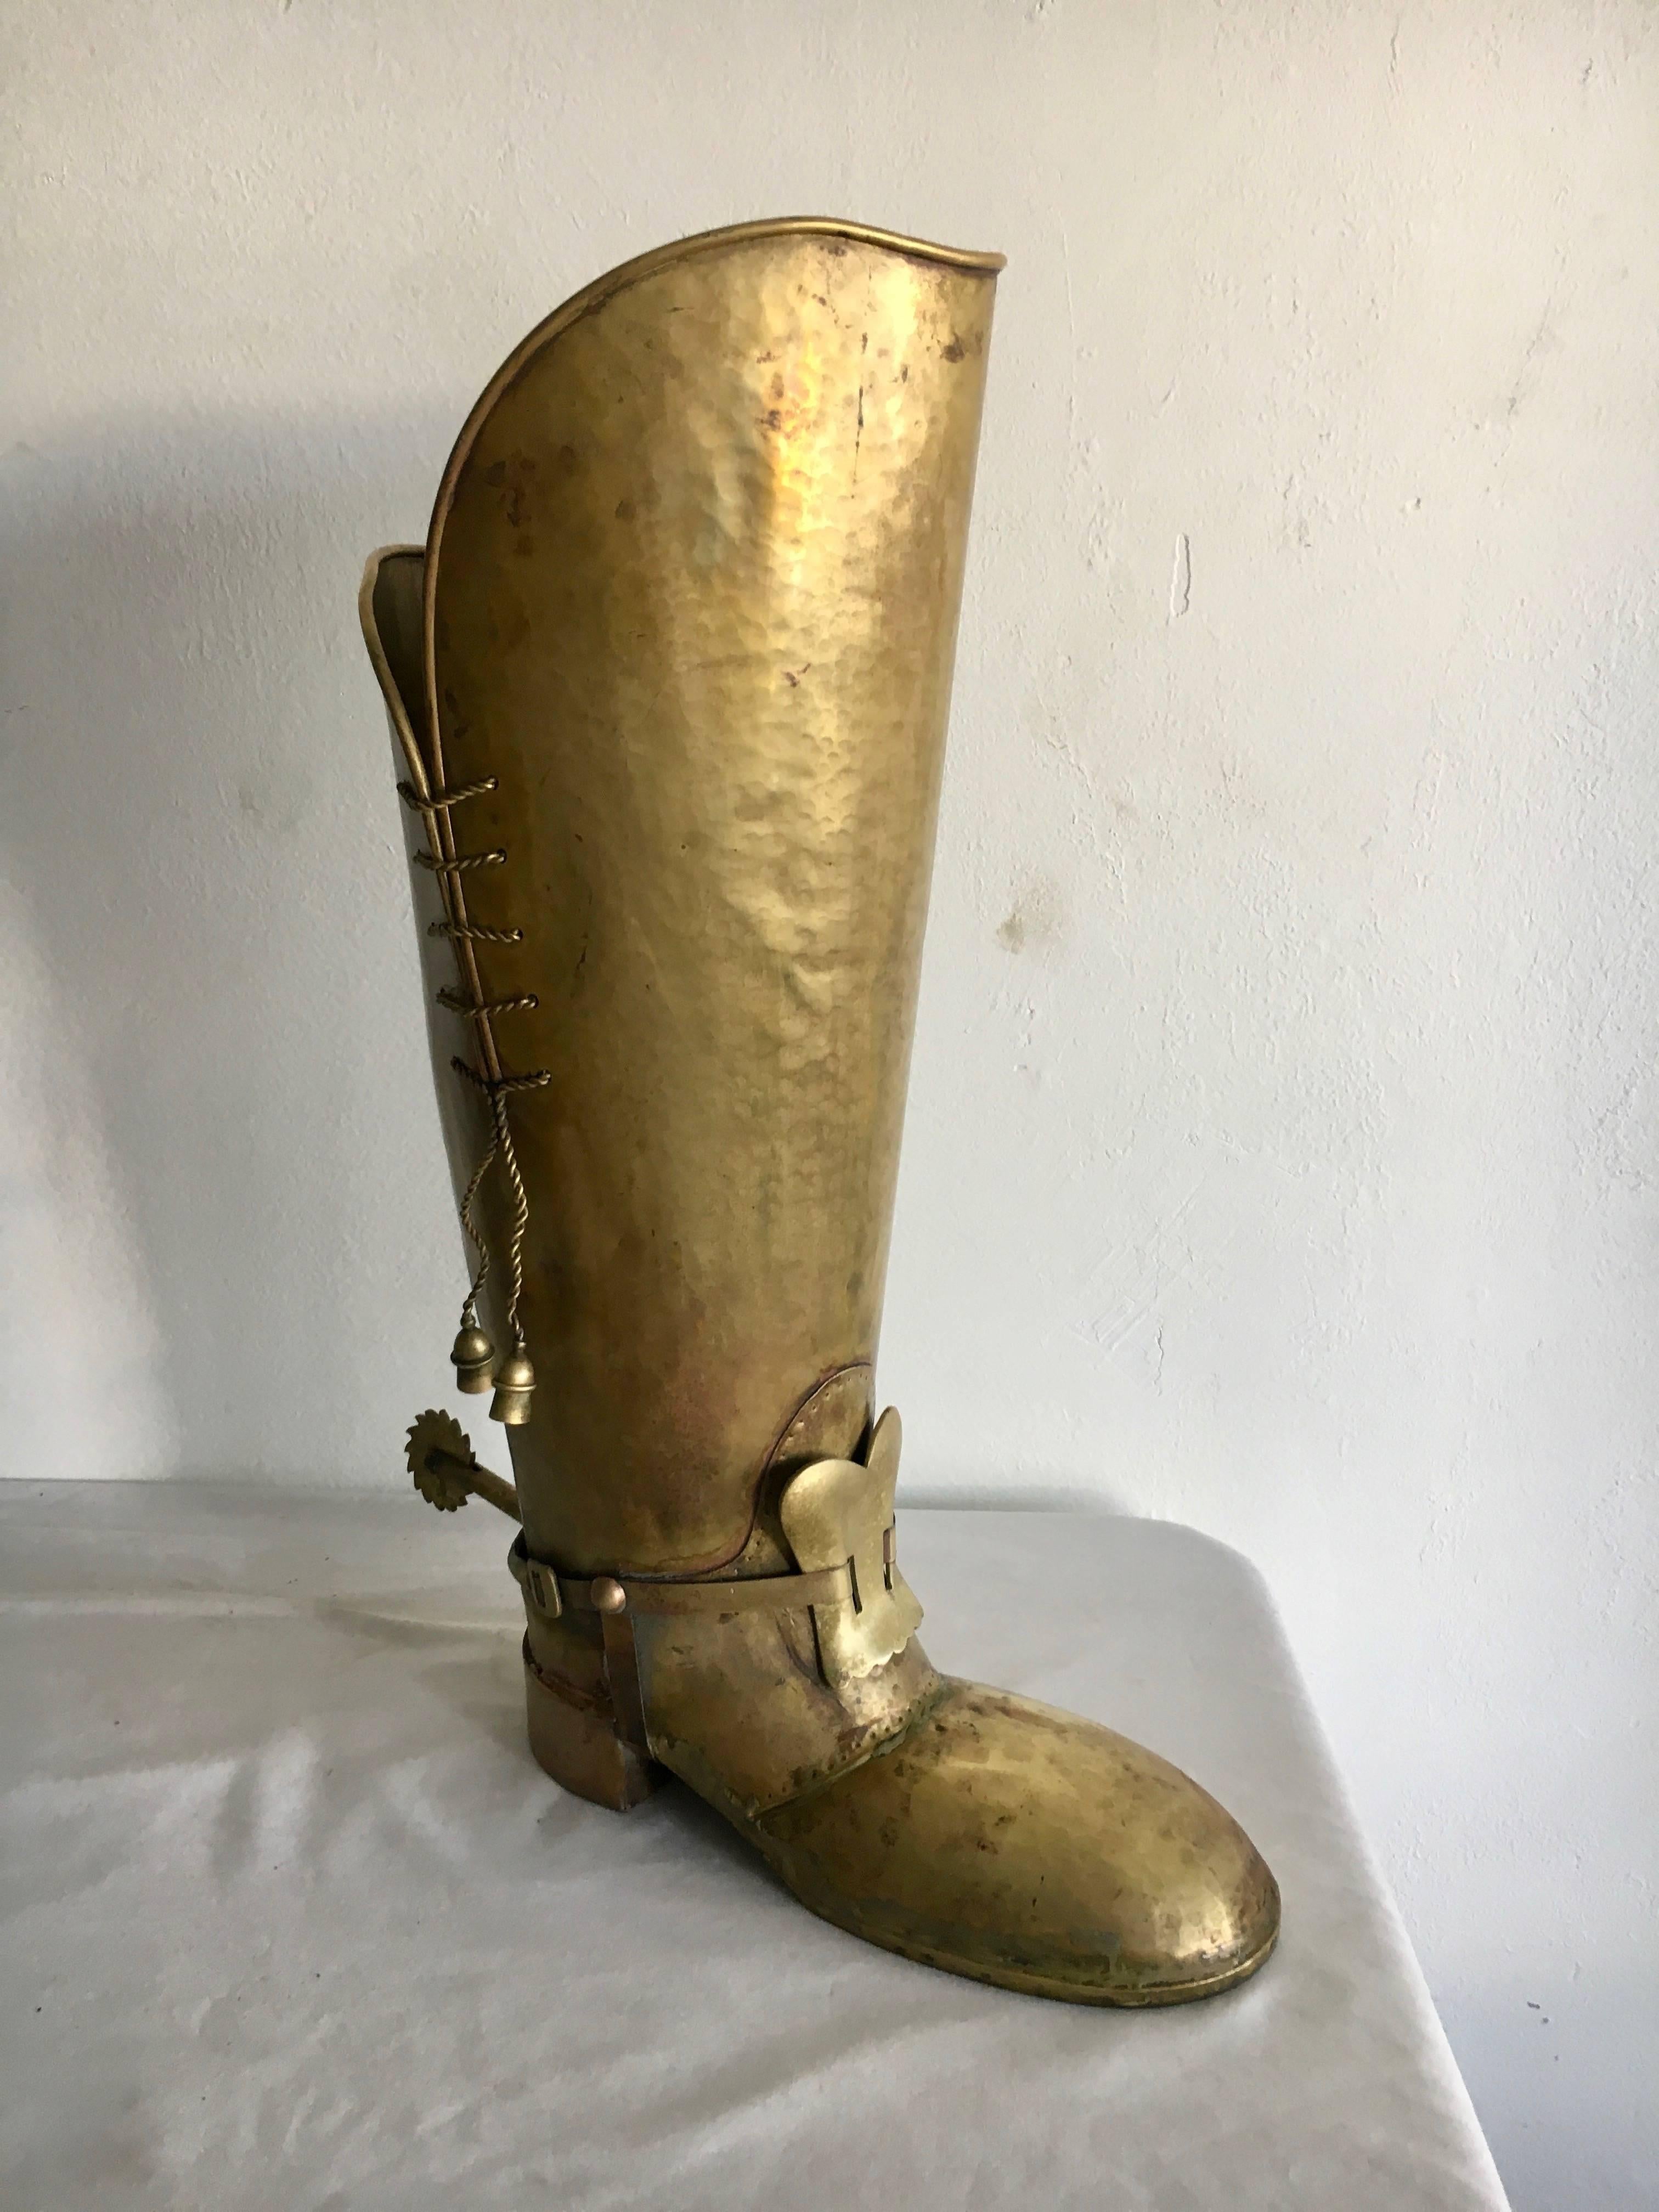 Brass Lombard boot umbrella stand, the boot has been re-welded, we have left the aged patinated look as we believe it enhances he integrity of the piece... a handsome piece with imperfections only adding to the rustic nature. Hold several umbrellas